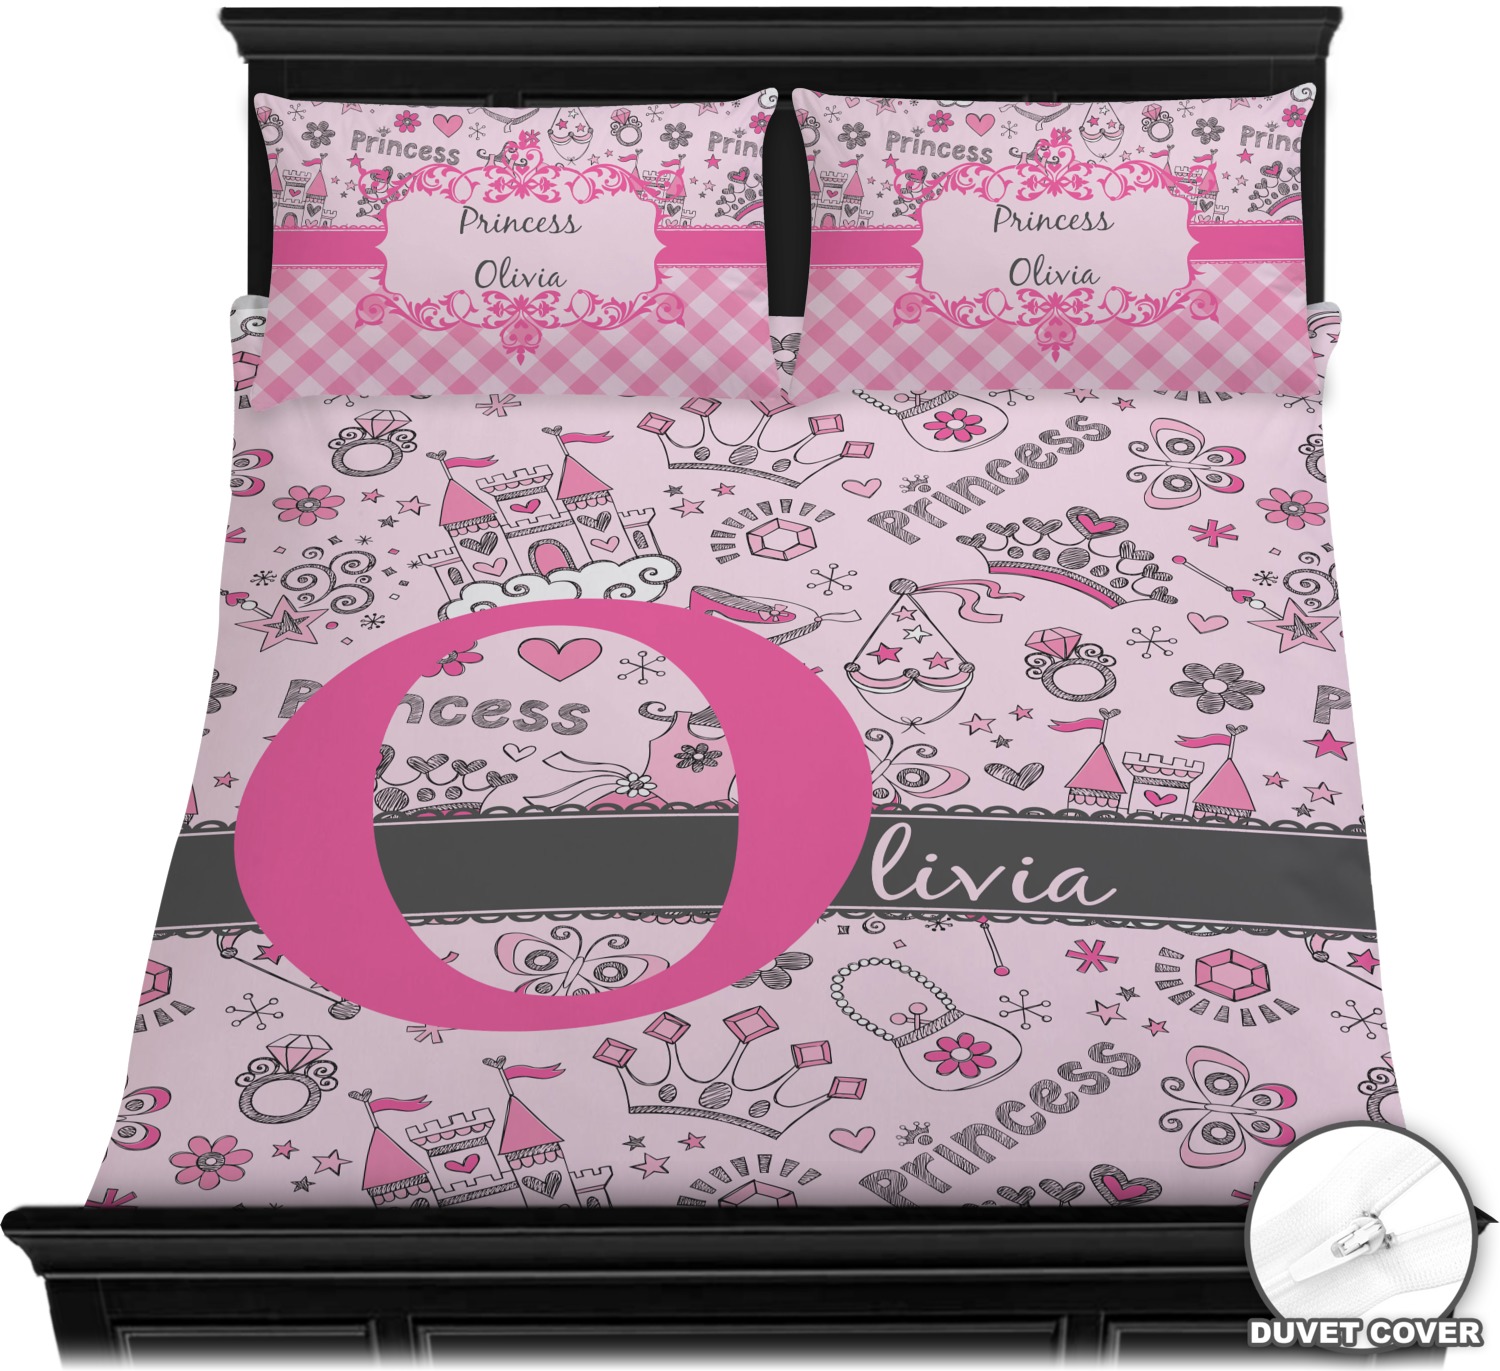 Princess Duvet Covers Personalized Youcustomizeit